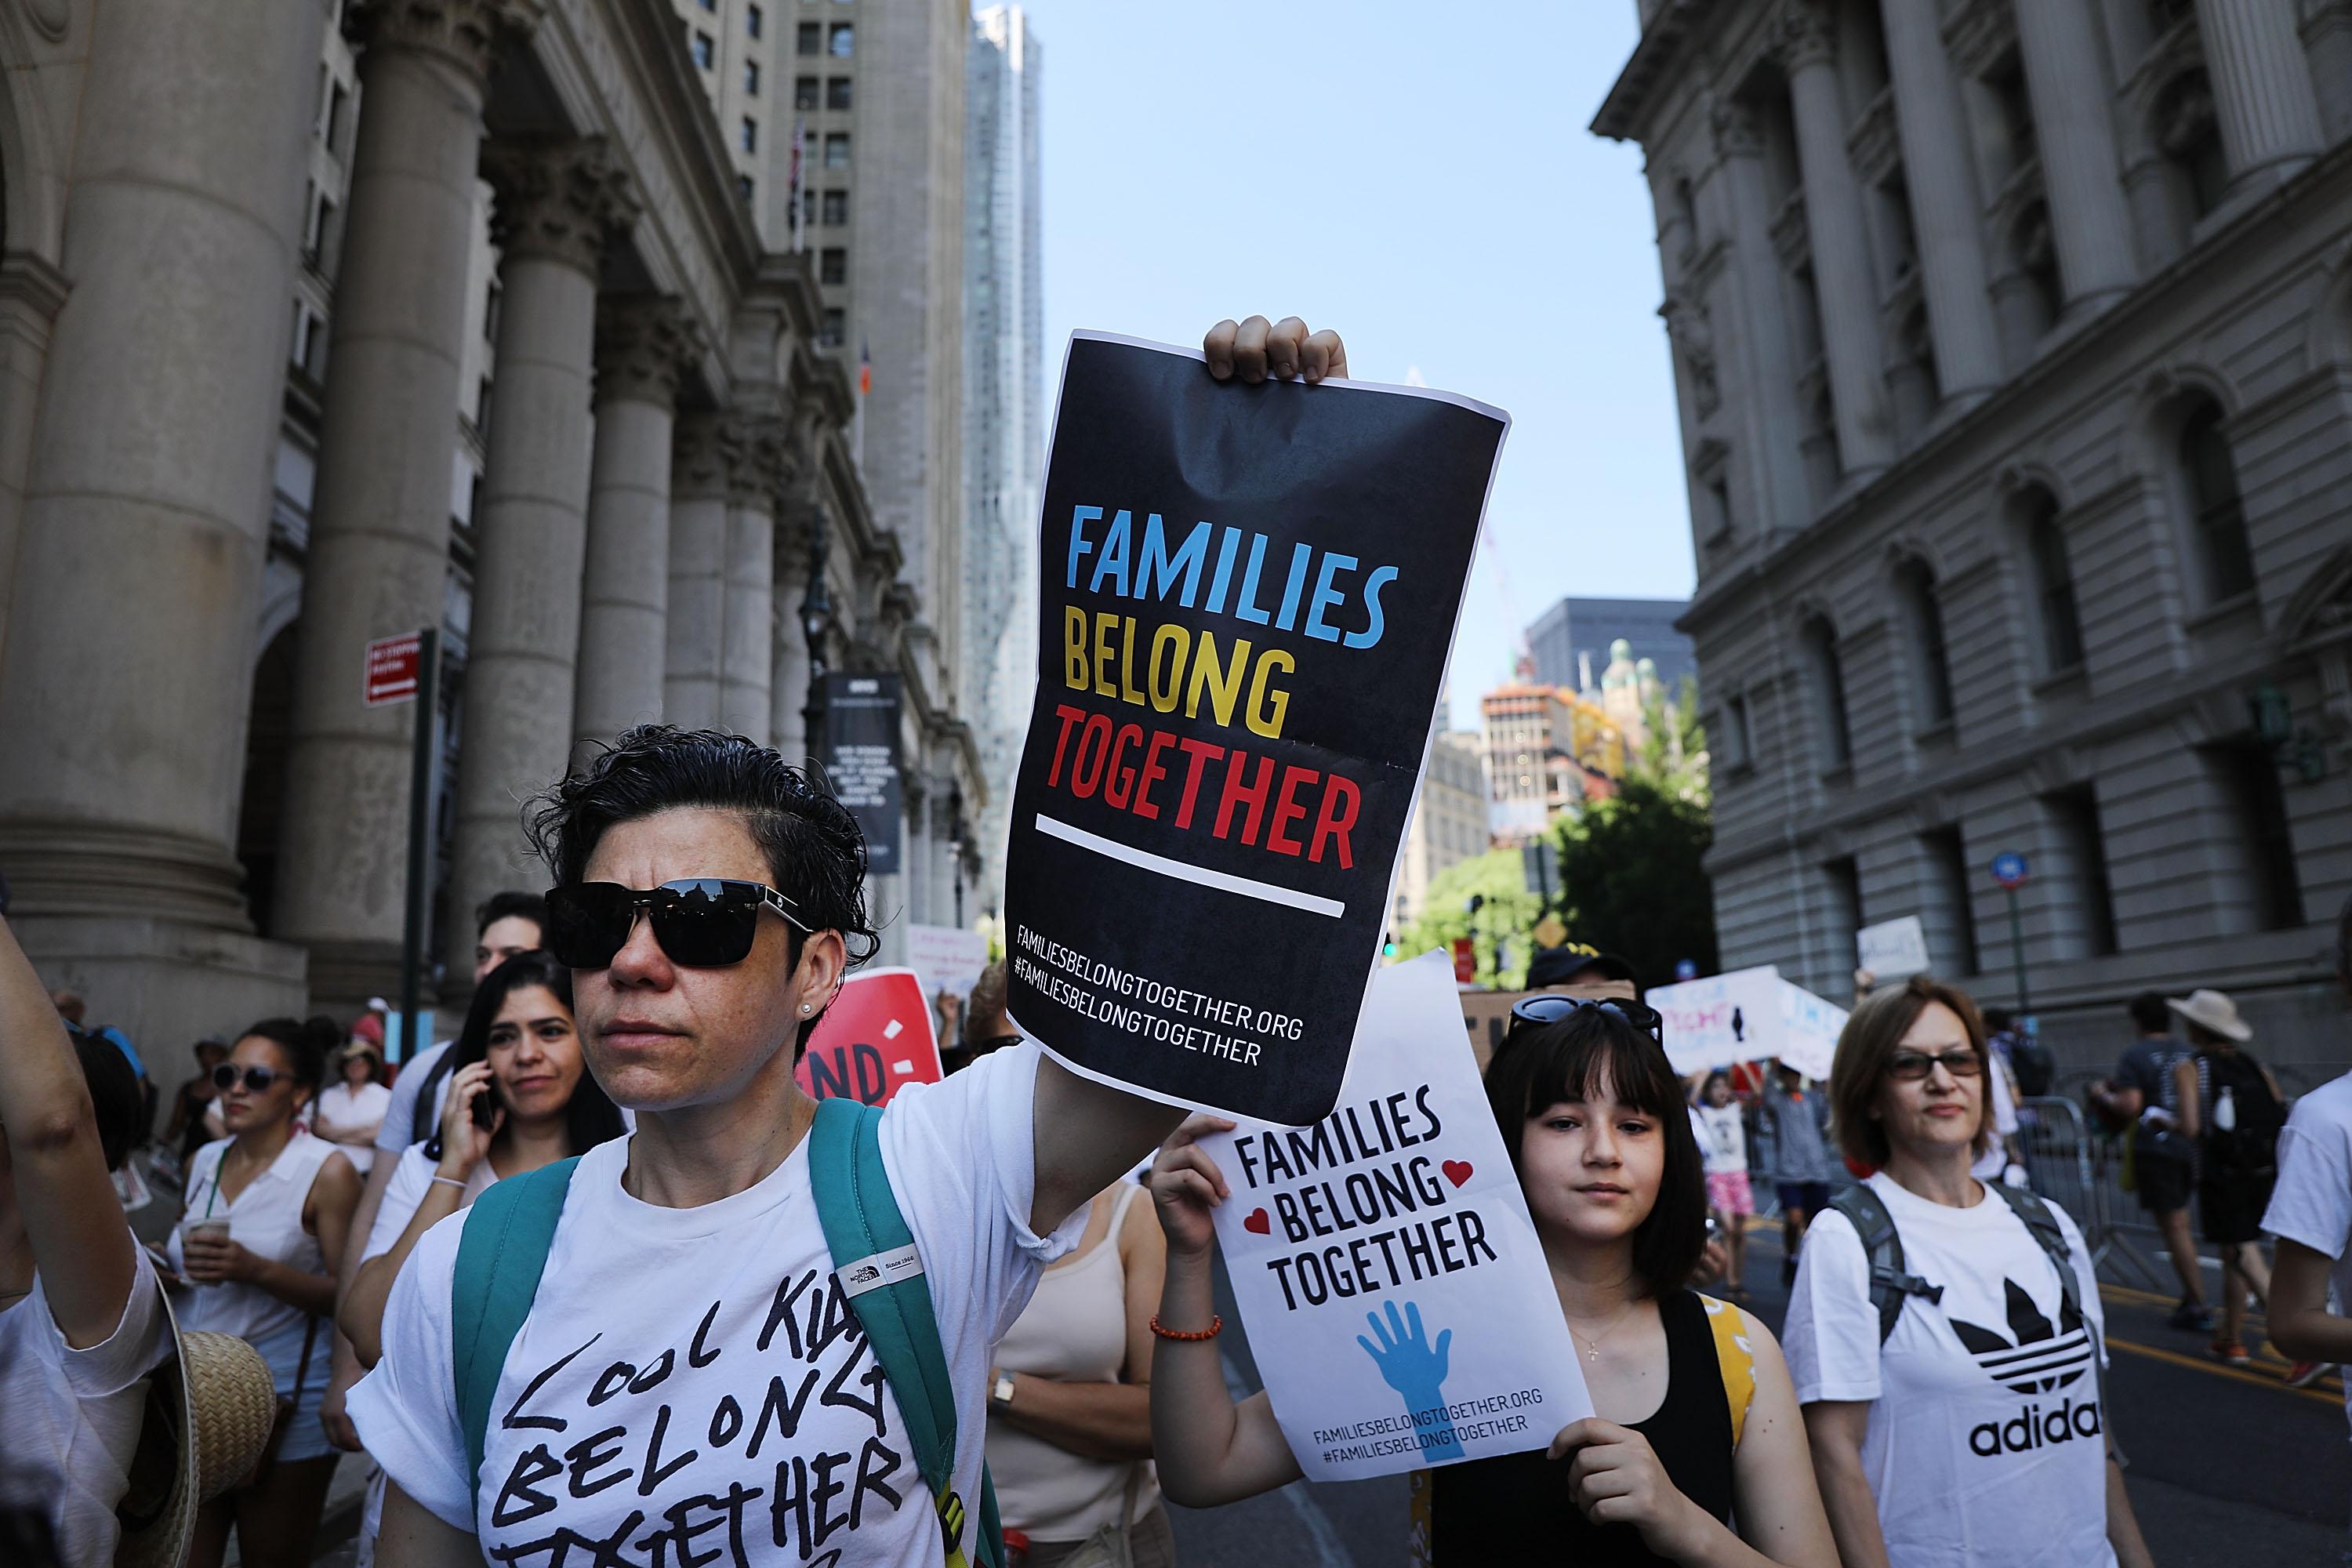 A man holding a sign that says "families belong together" leads a march of protesters with similar signs.